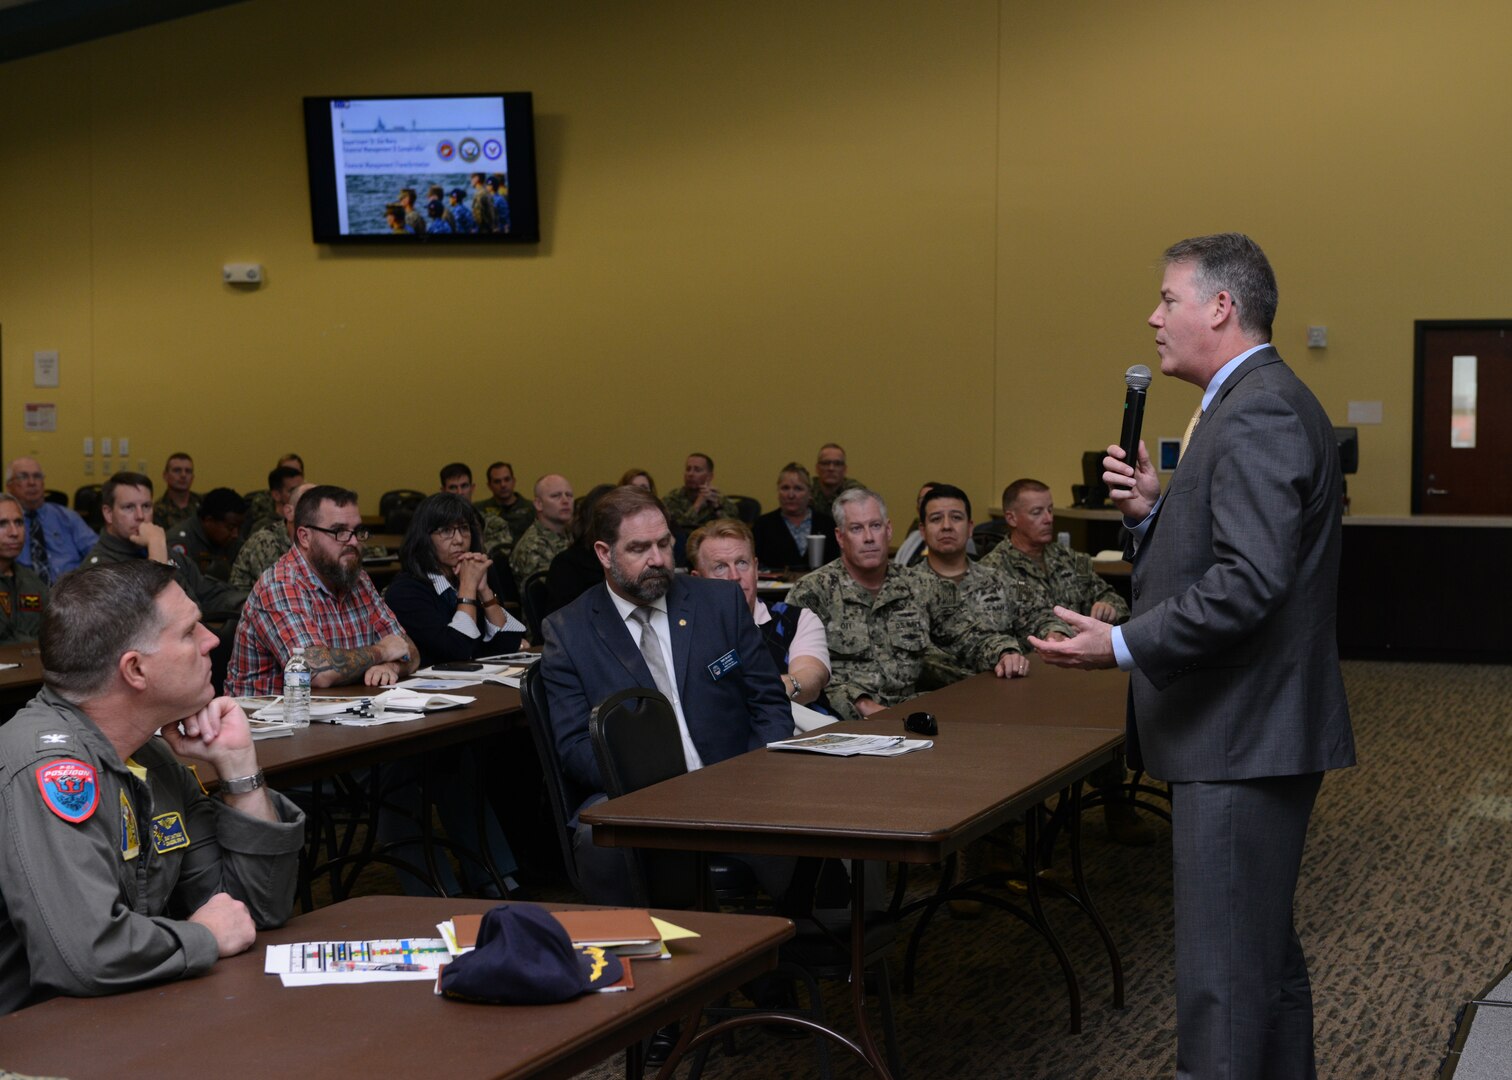 Mike Cannon (seated, second from left in first row), DLA Disposition Services director, and Kathy Atkins-Nunez (seated, second from left in second row, DLA Disposition Services’ South-East Region director, listen as Thomas W. Harker, assistant secretary of the Navy for financial management and comptroller, presents data findings from a recent Navy full financial statement audit.